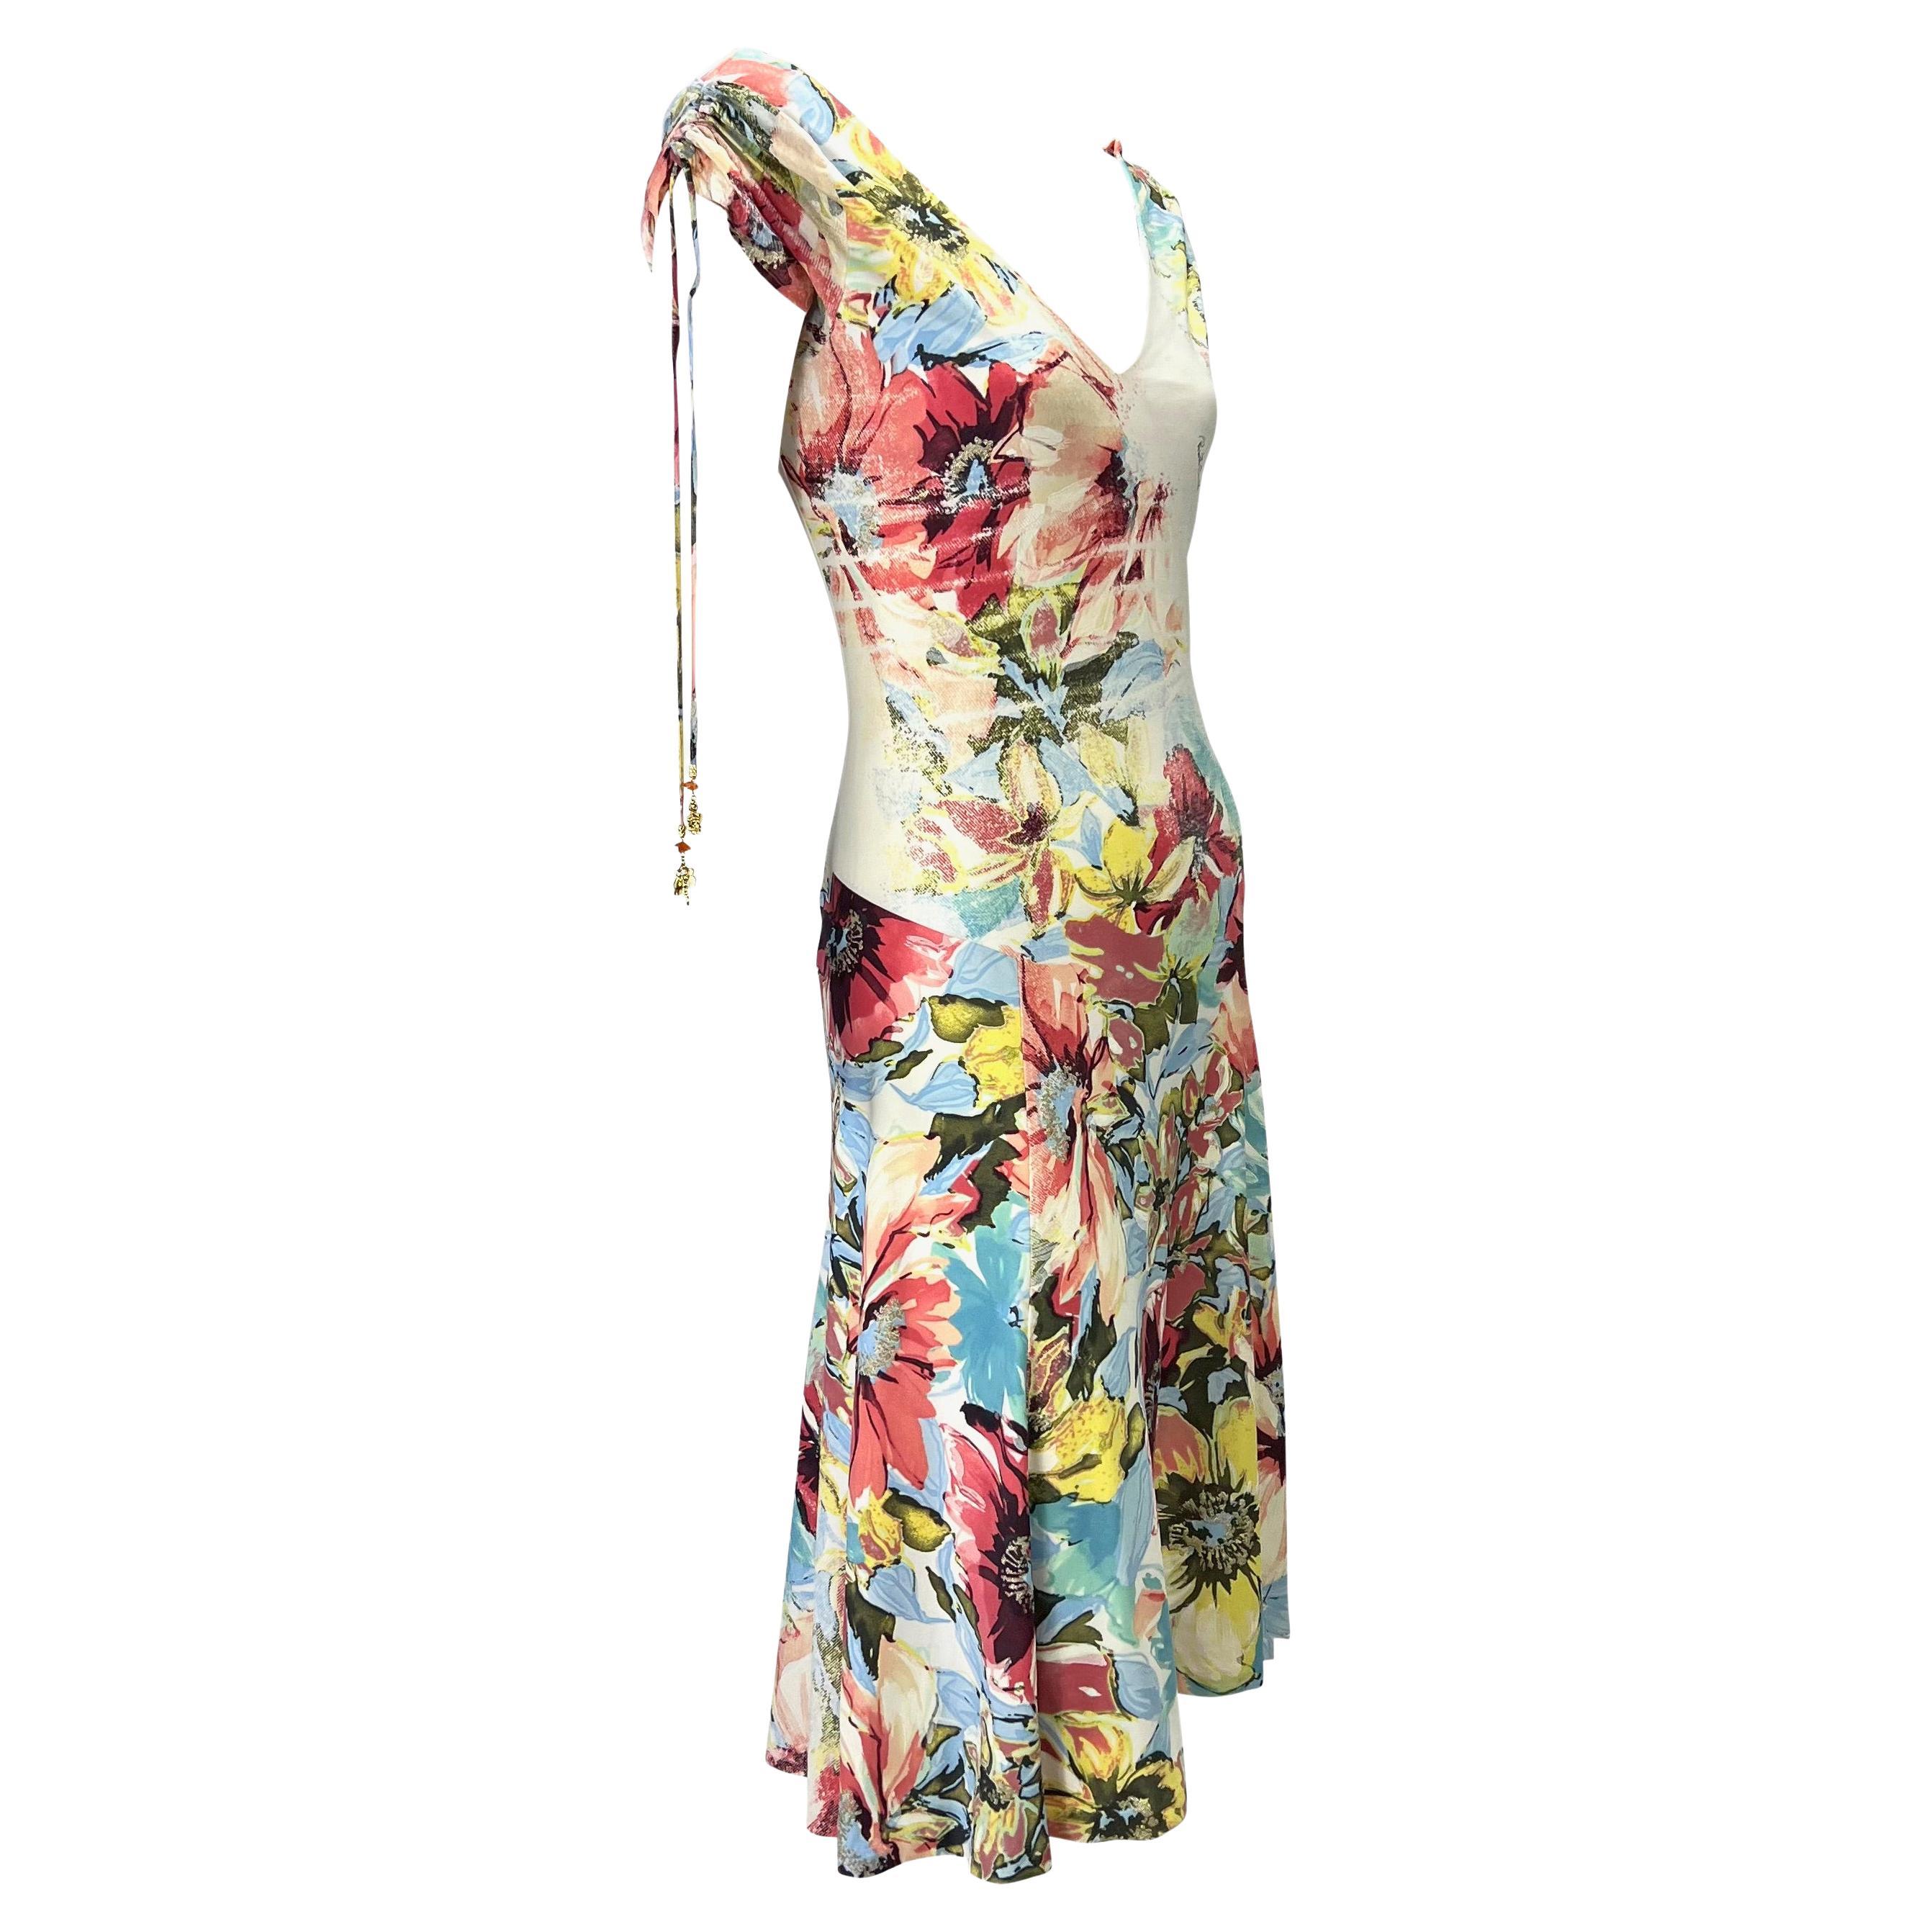 S/S 2003 Roberto Cavalli Floral Abstract Watercolor Viscose Stretch ...